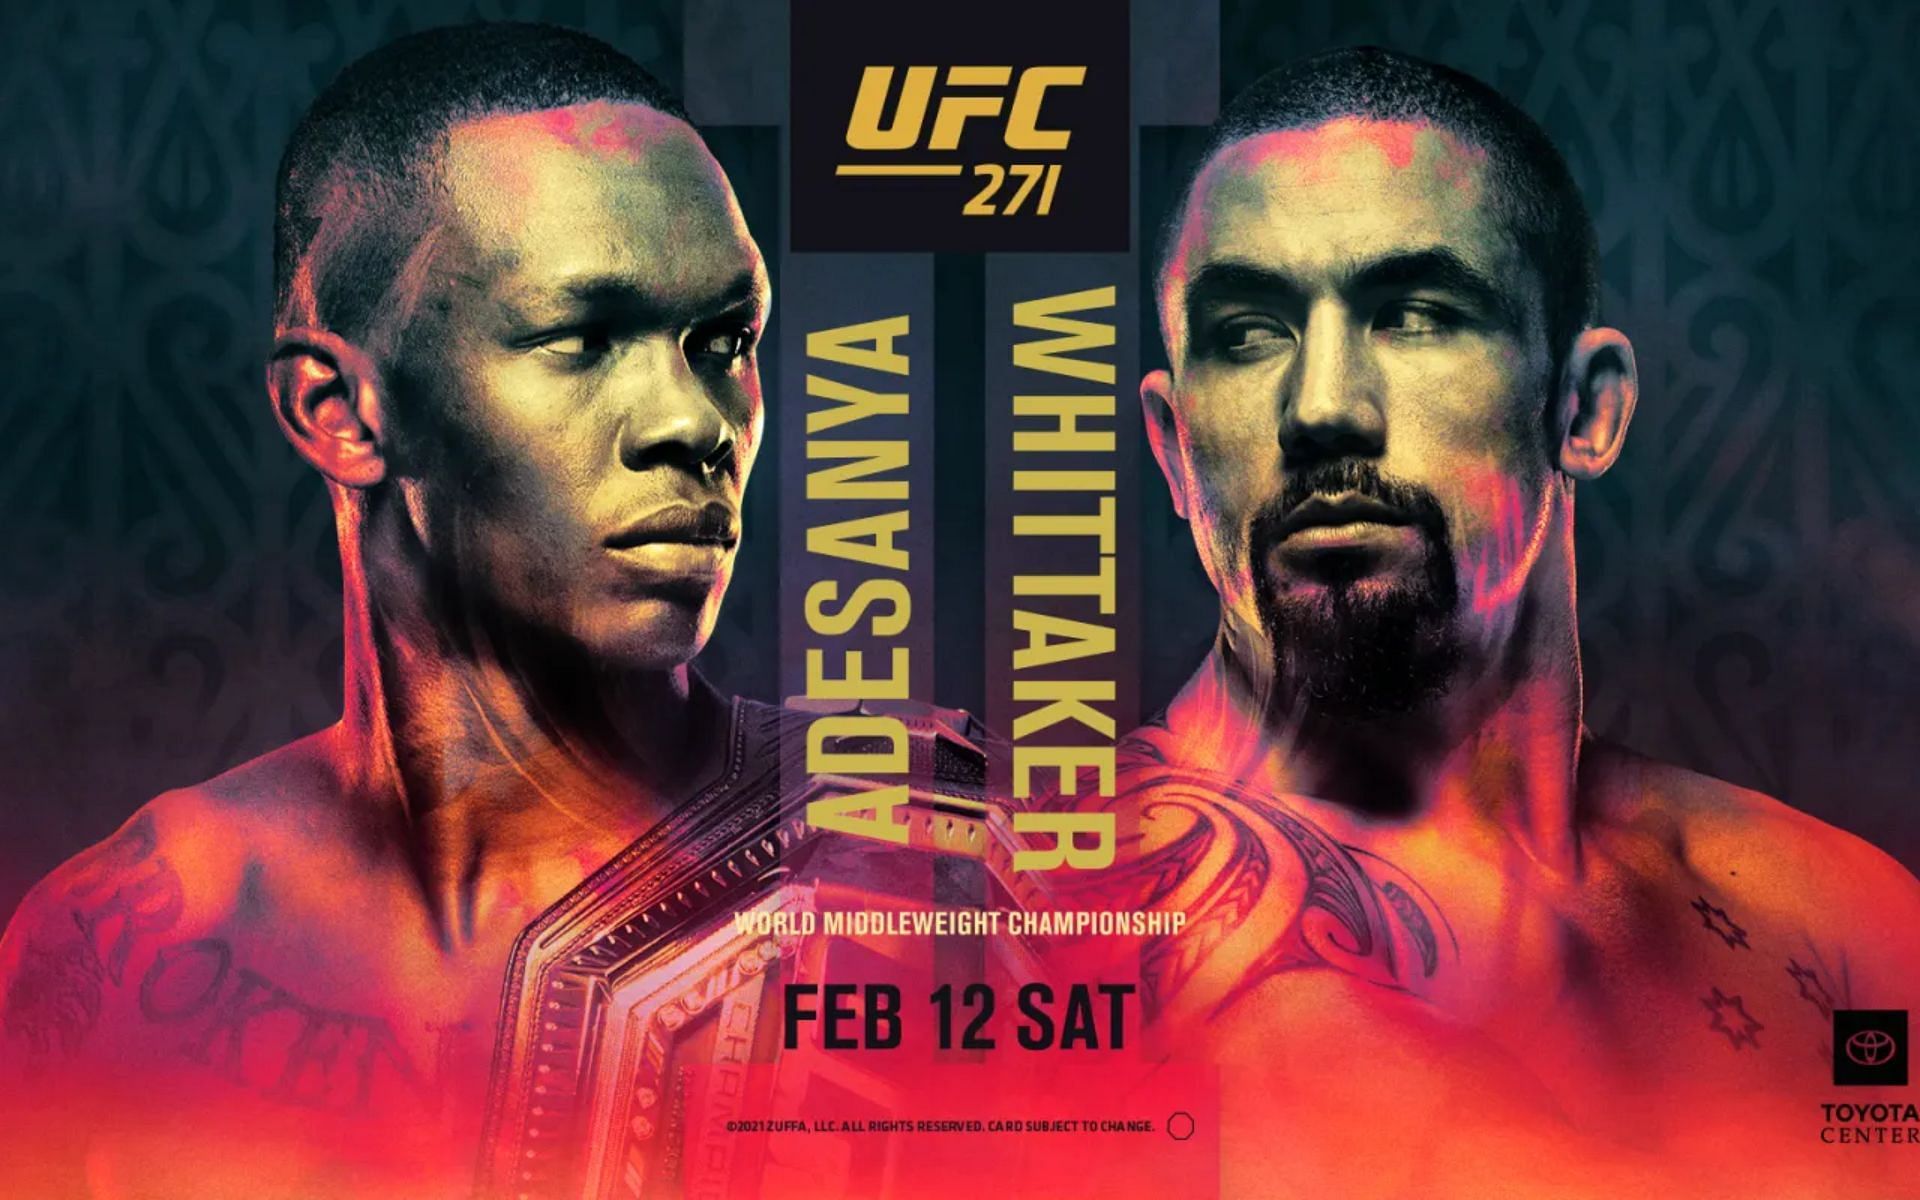 Israel Adesanya and Robert Whittaker face off in their huge rematch this weekend with the UFC middleweight title on the line